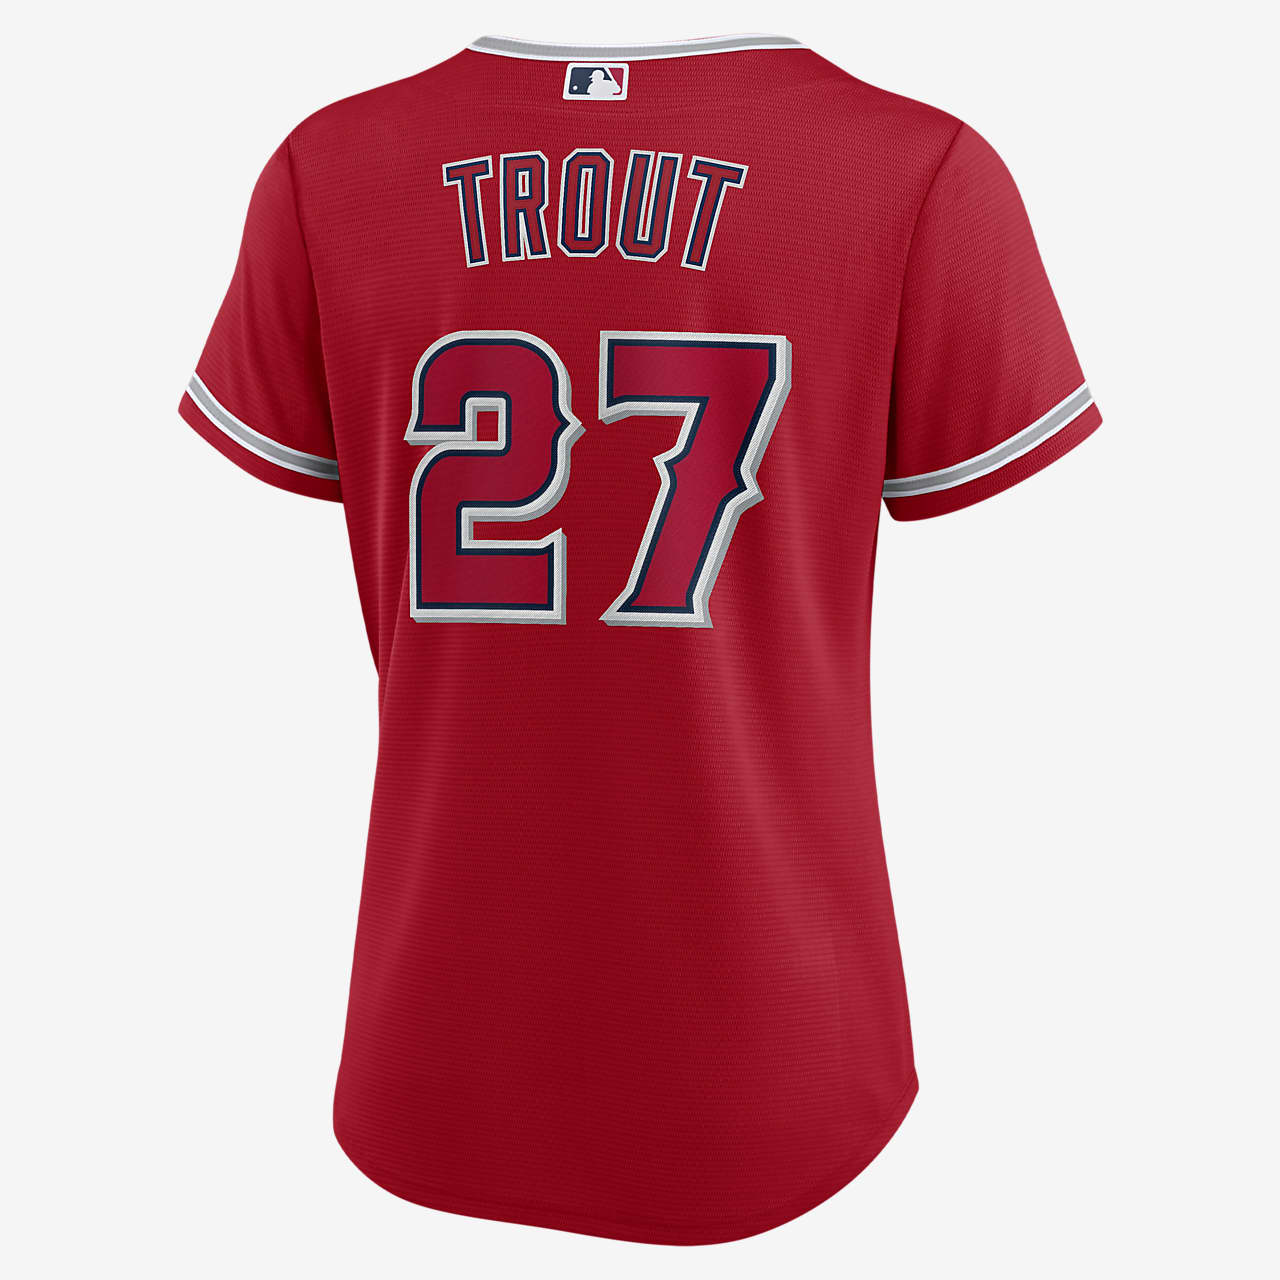 Outerstuff Mike Trout #27 Los Angeles Angels Youth Boys (8-20) Jersey